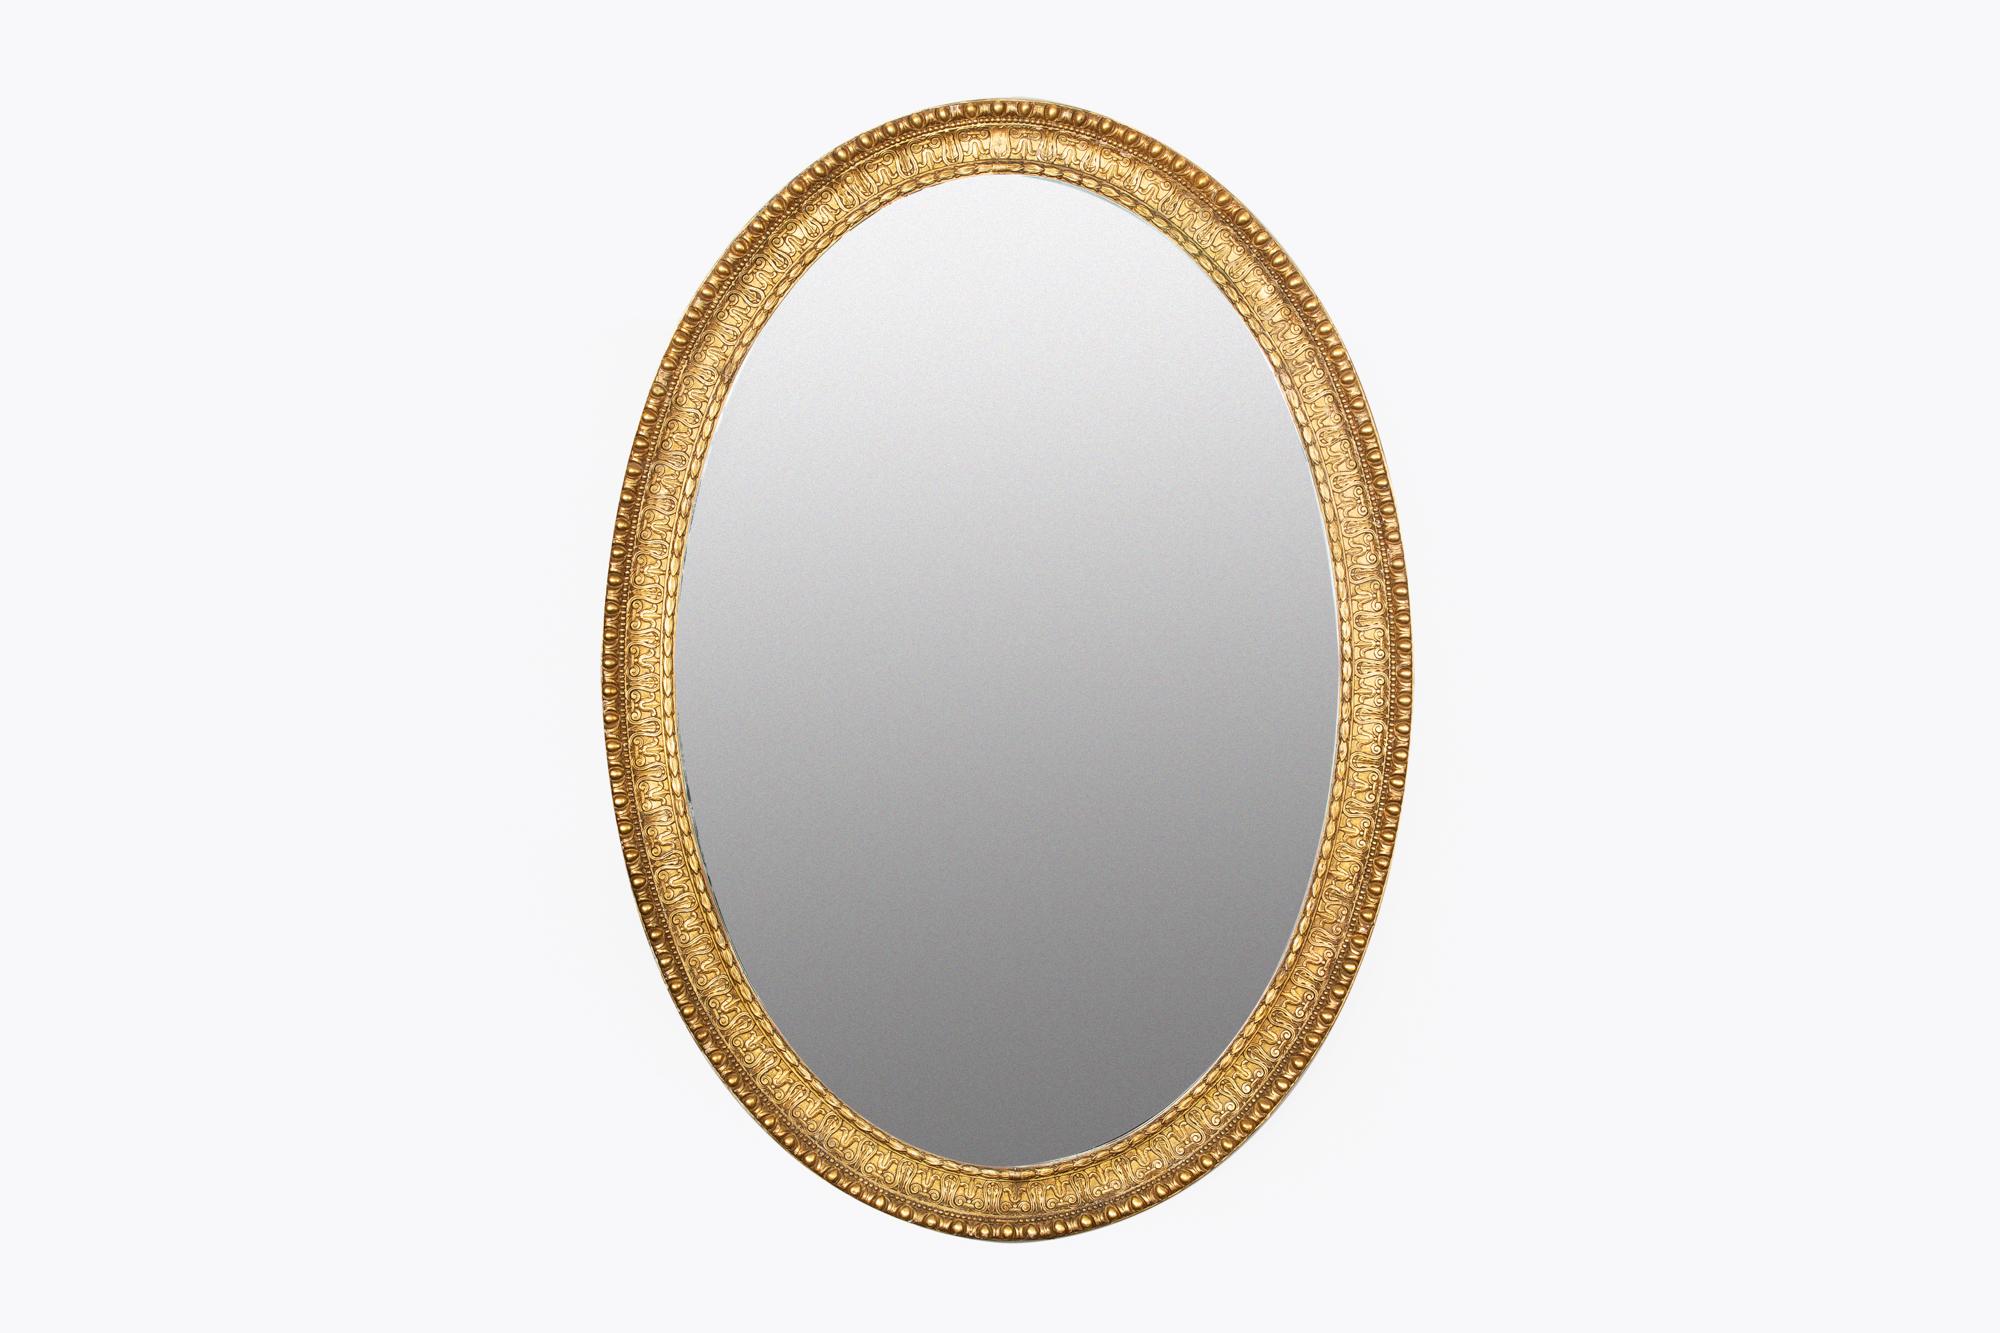 Early 19th century Regency rare pair of large mirrors. The mirrored plate of oval form set within carved giltwood frame of bands of wheatsheaf, lyre, beading and egg and dart motif, circa 1810.